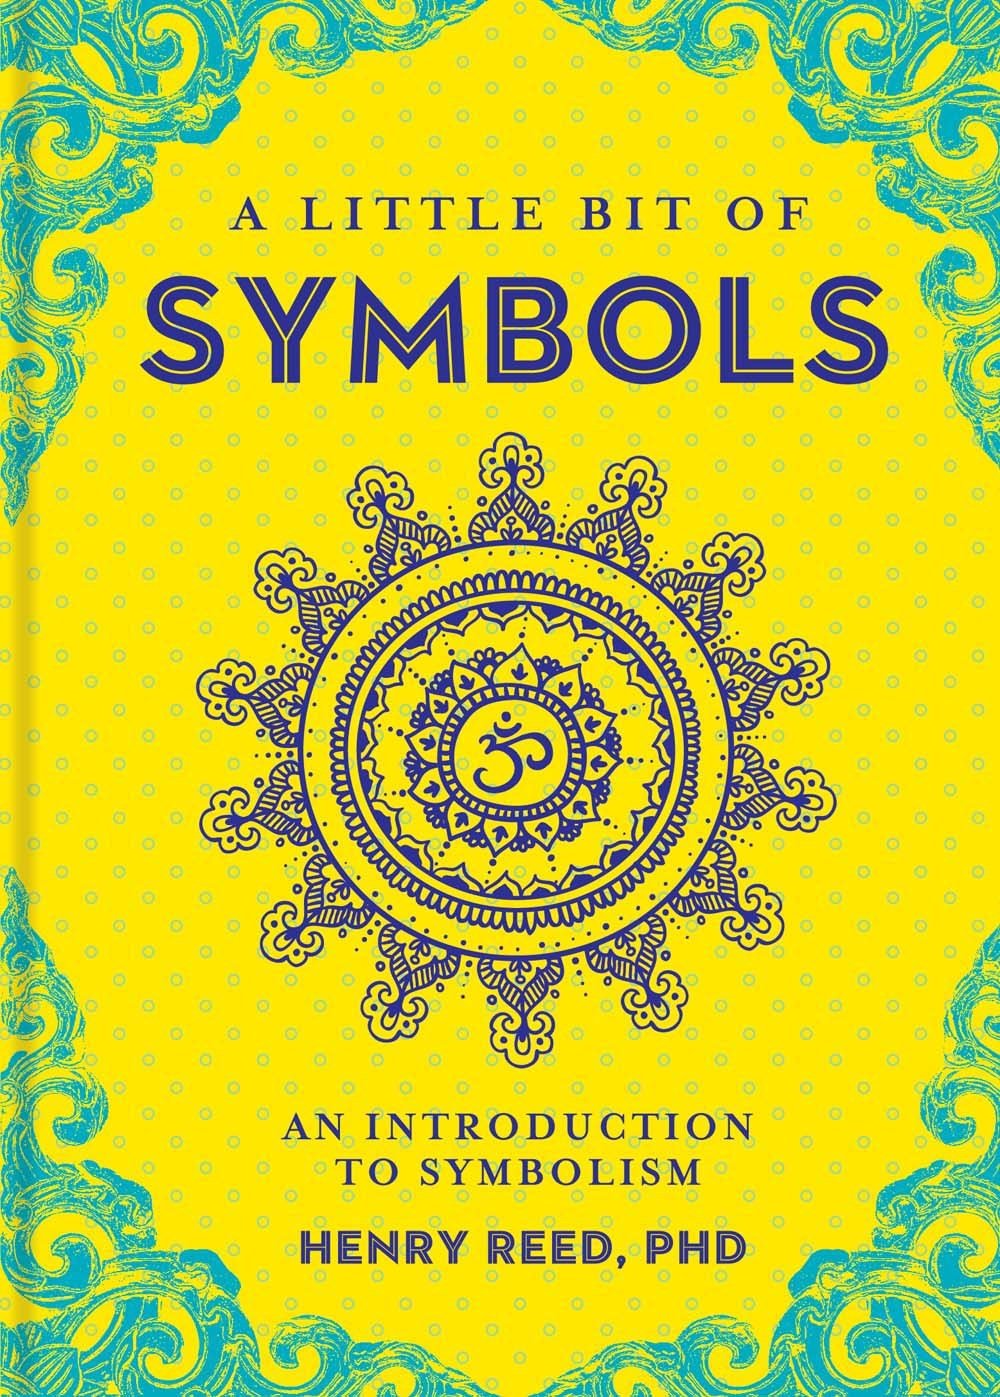 A Little Bit of Symbols: An Introduction to Symbolism [Henry Reed PhD]